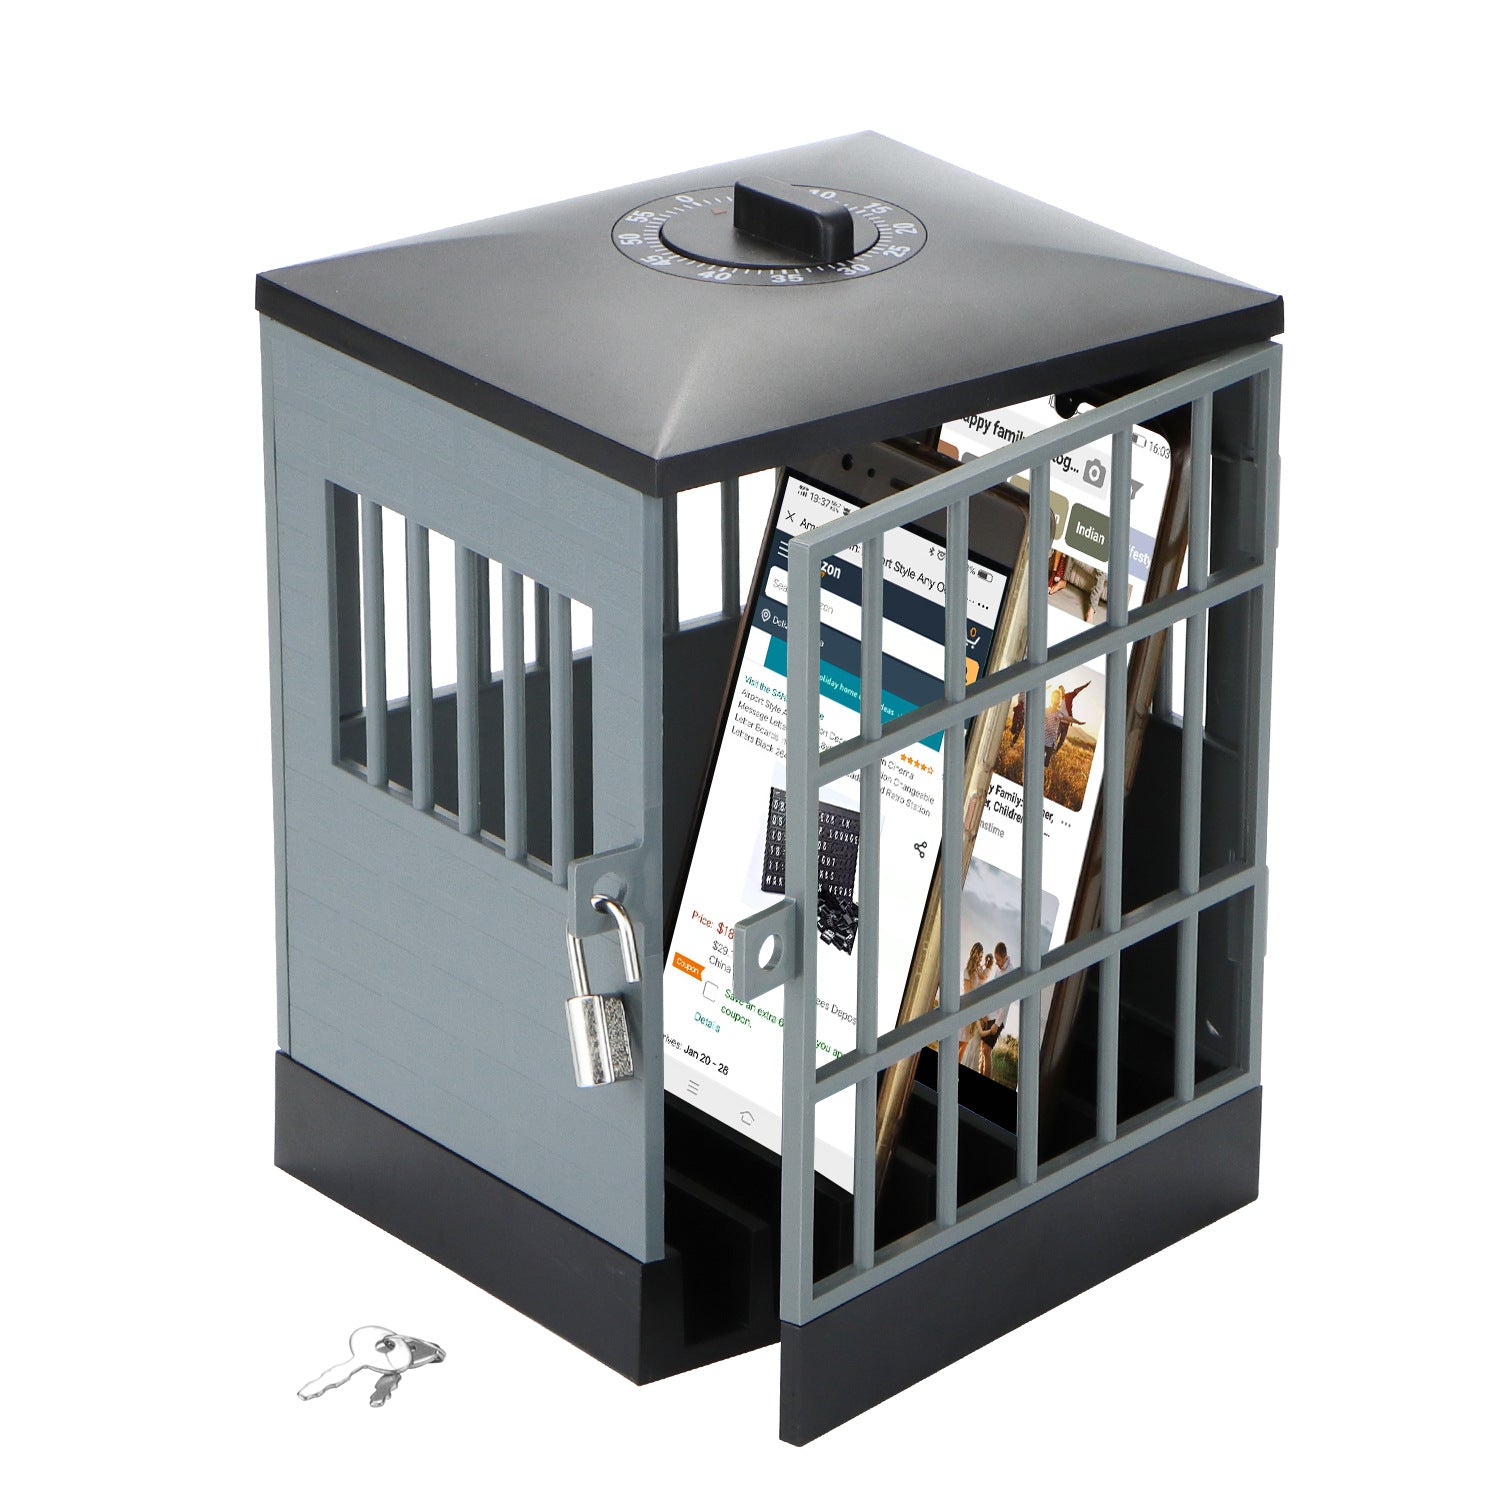 Phone Box Mobile Phone Cage Timer Mobile Phone Prison